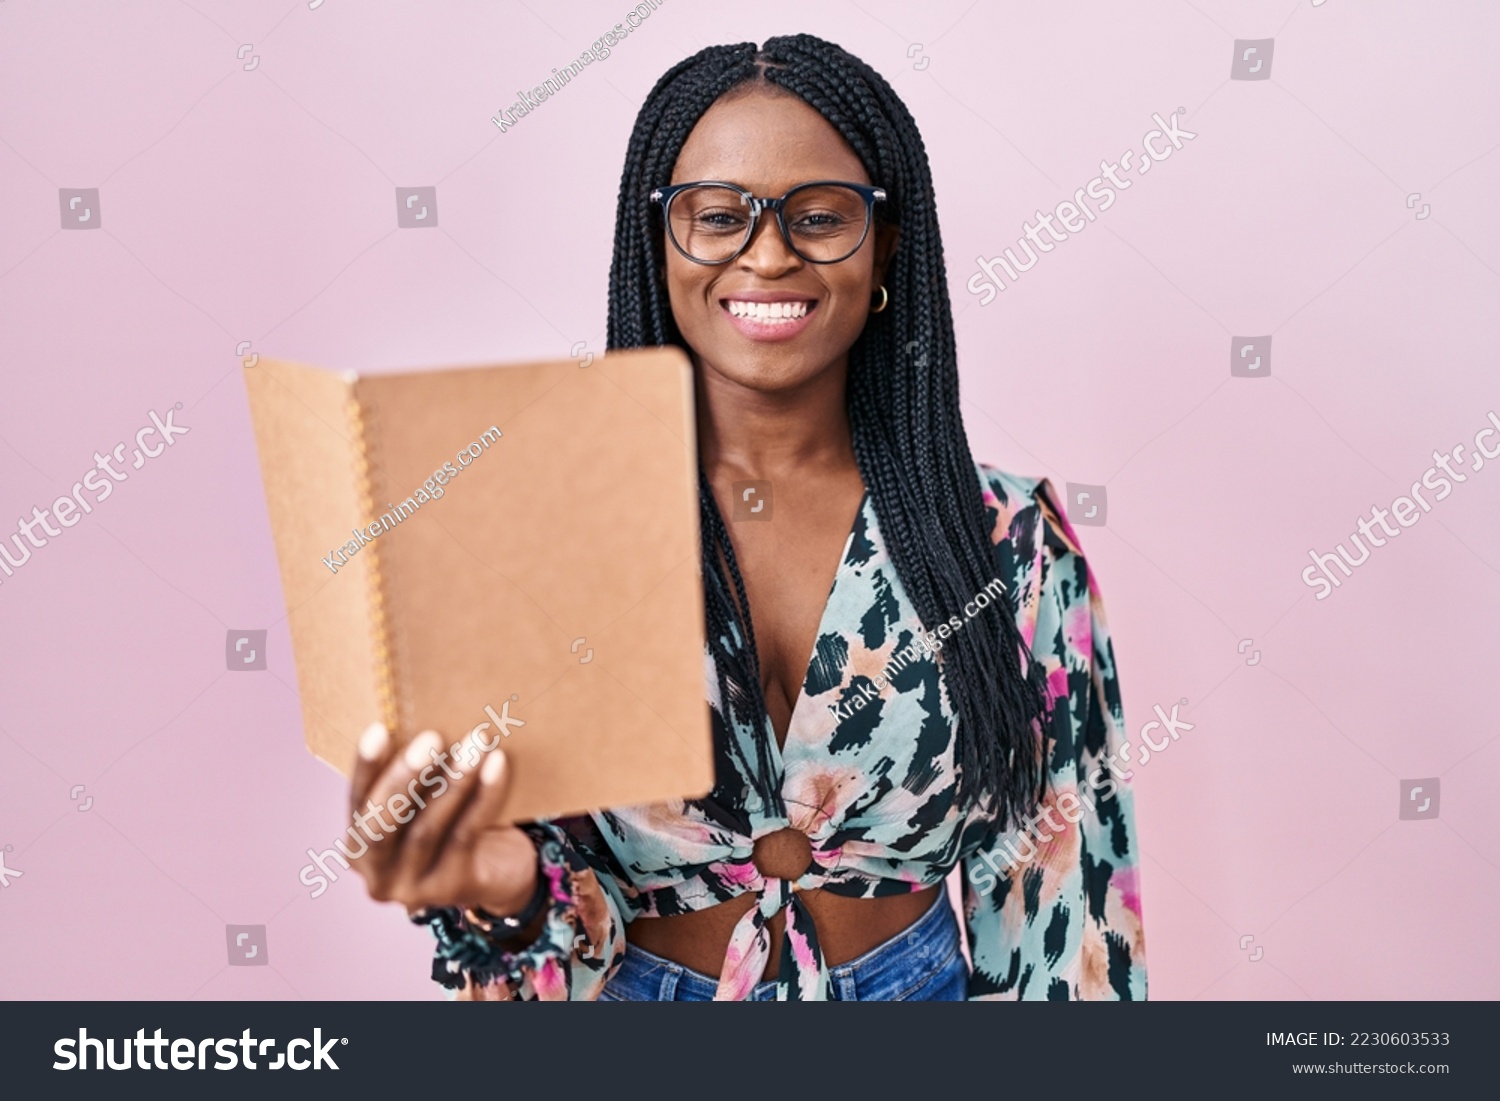 African woman with braids reading a book looking positive and happy standing and smiling with a confident smile showing teeth  #2230603533